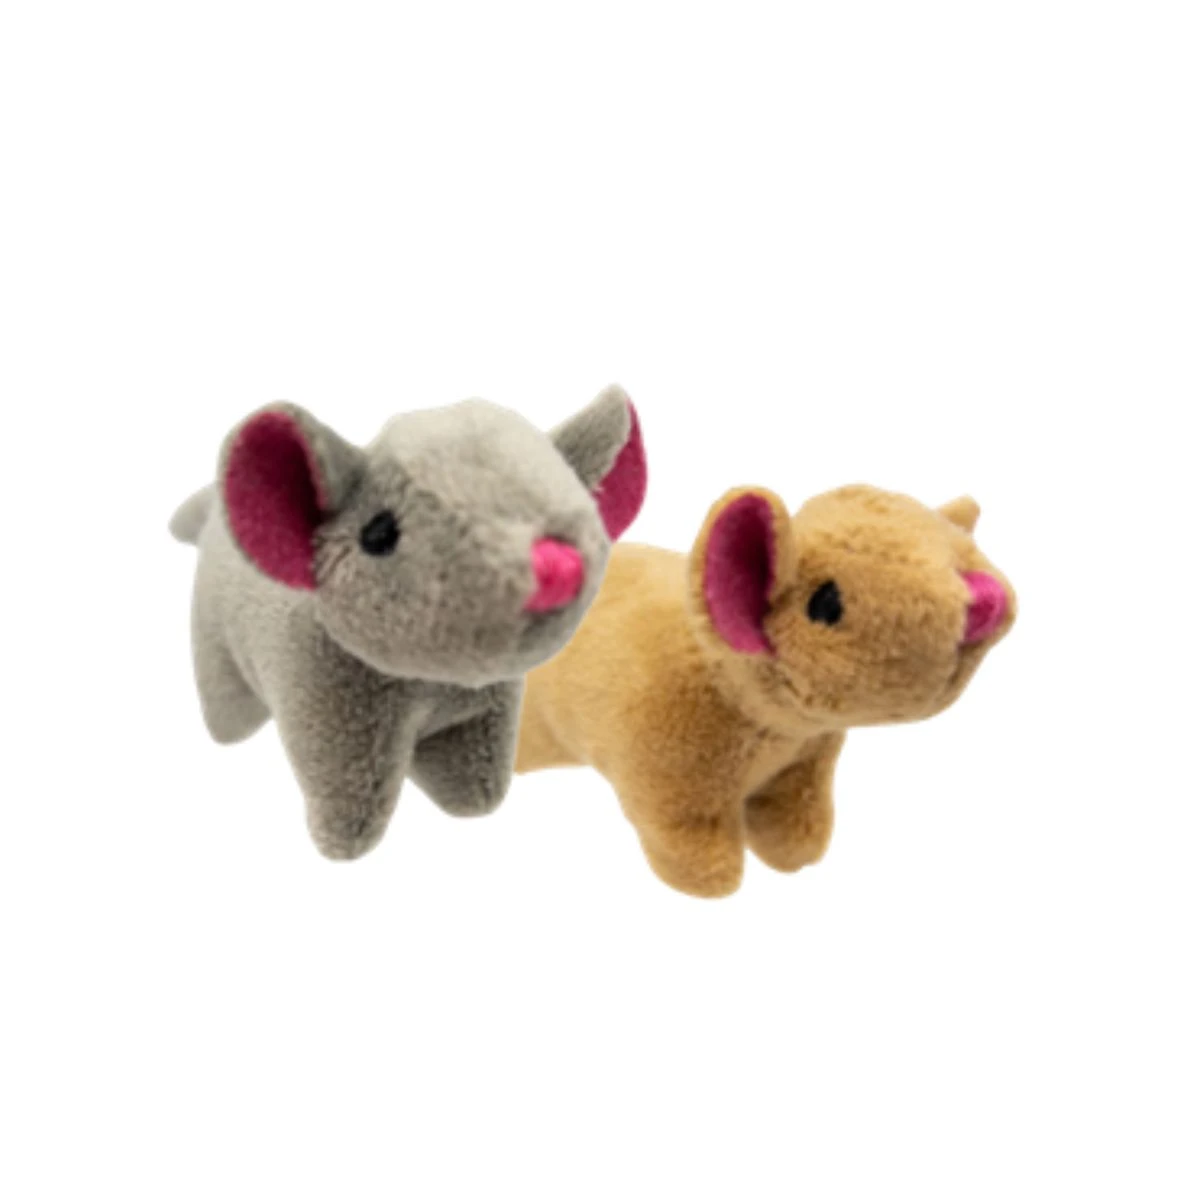 HuggleKat Wee Squooshie Mice Cat Toy with Catnip - 2 pack 